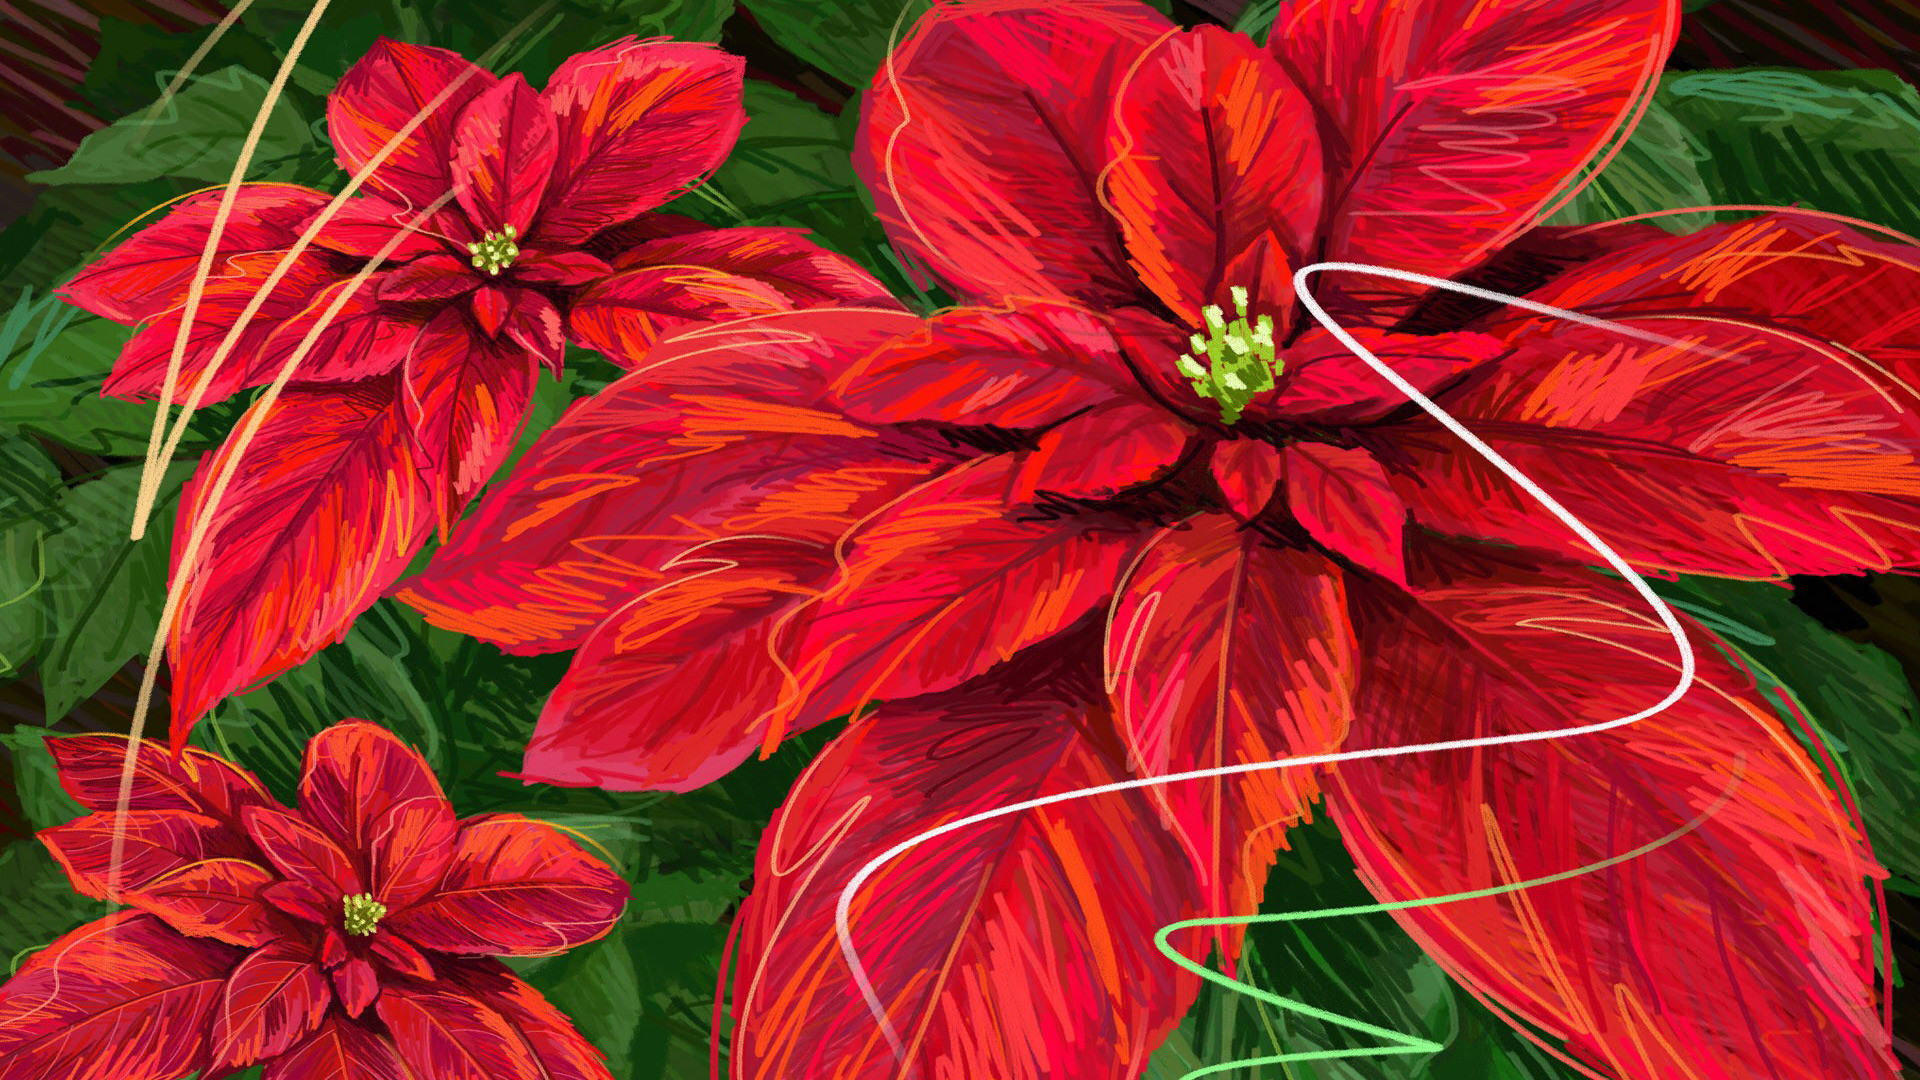 1920x1080 Pics Photos - Bright Red Poinsettia Flowers On An Old Wood .